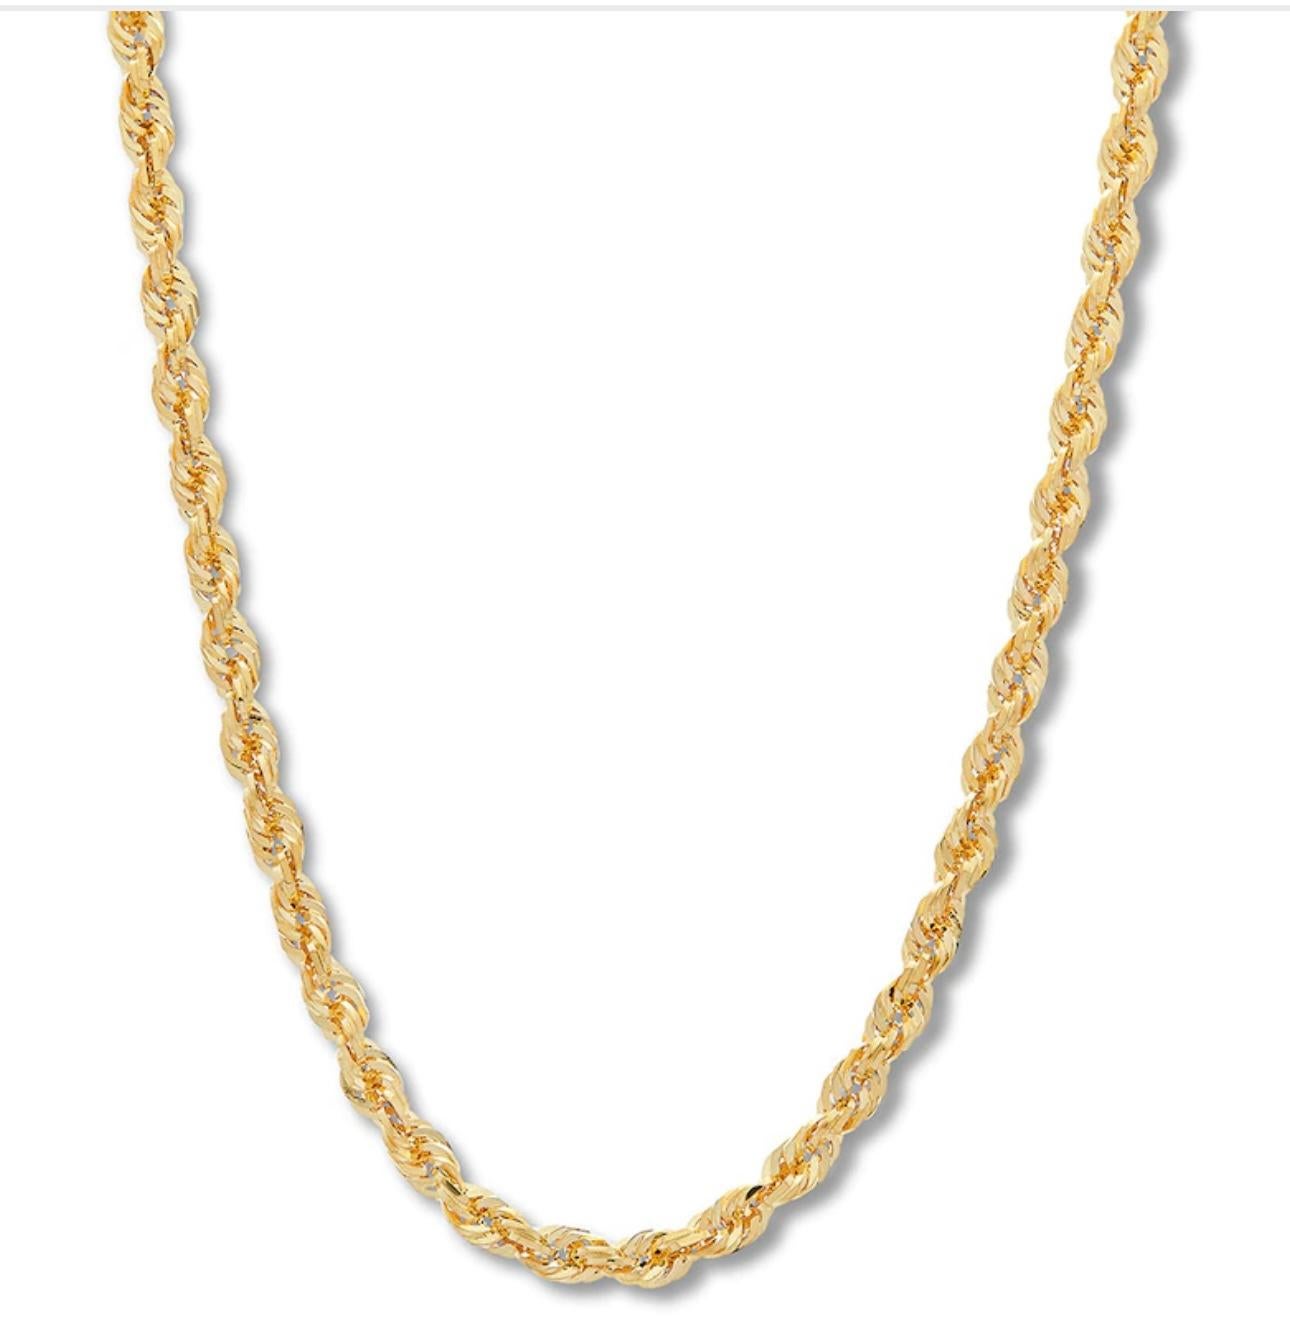 Vintage 14 Karat Yellow Gold 17 Gm, Rope Chain Necklace 1